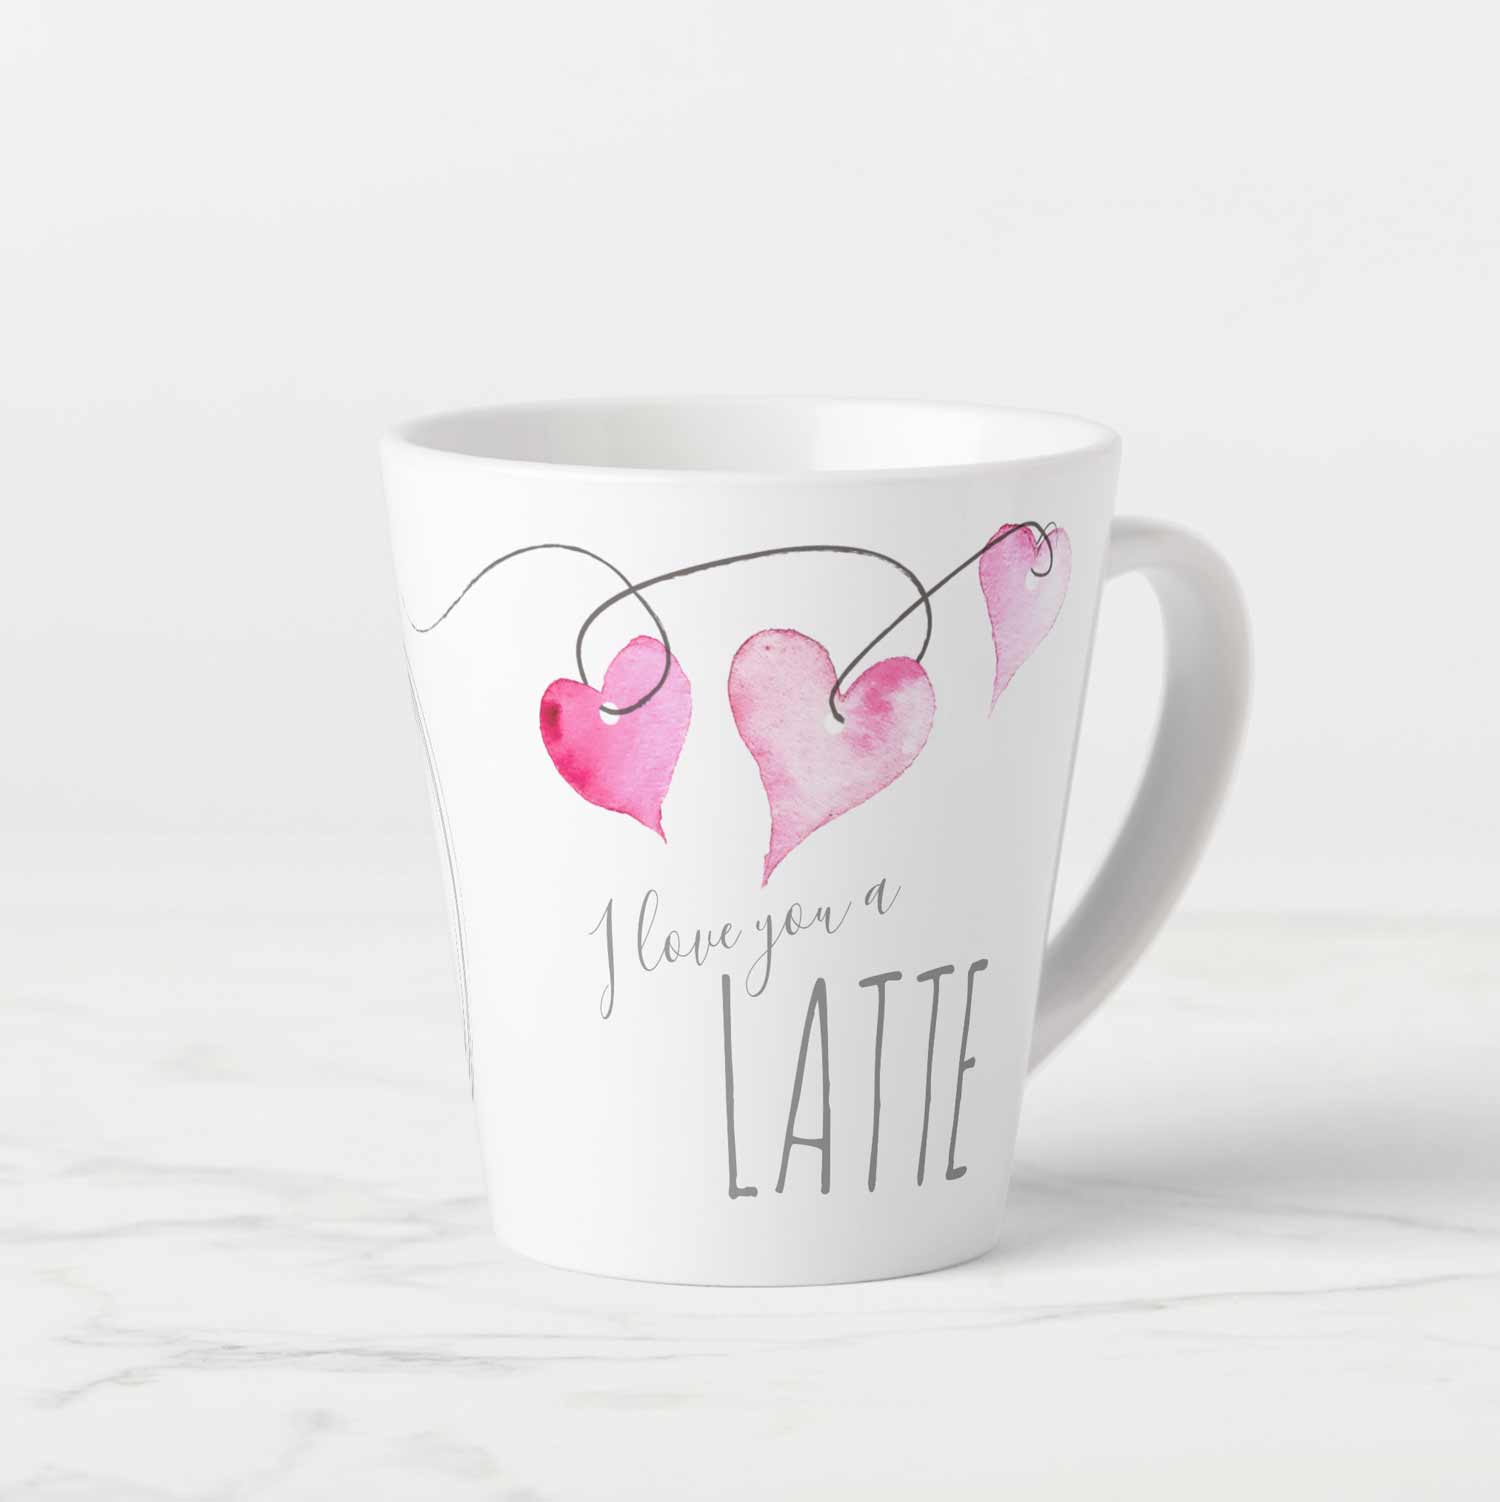 Valentines day gift ideas latte mug for coffee lovers. Click to shop.